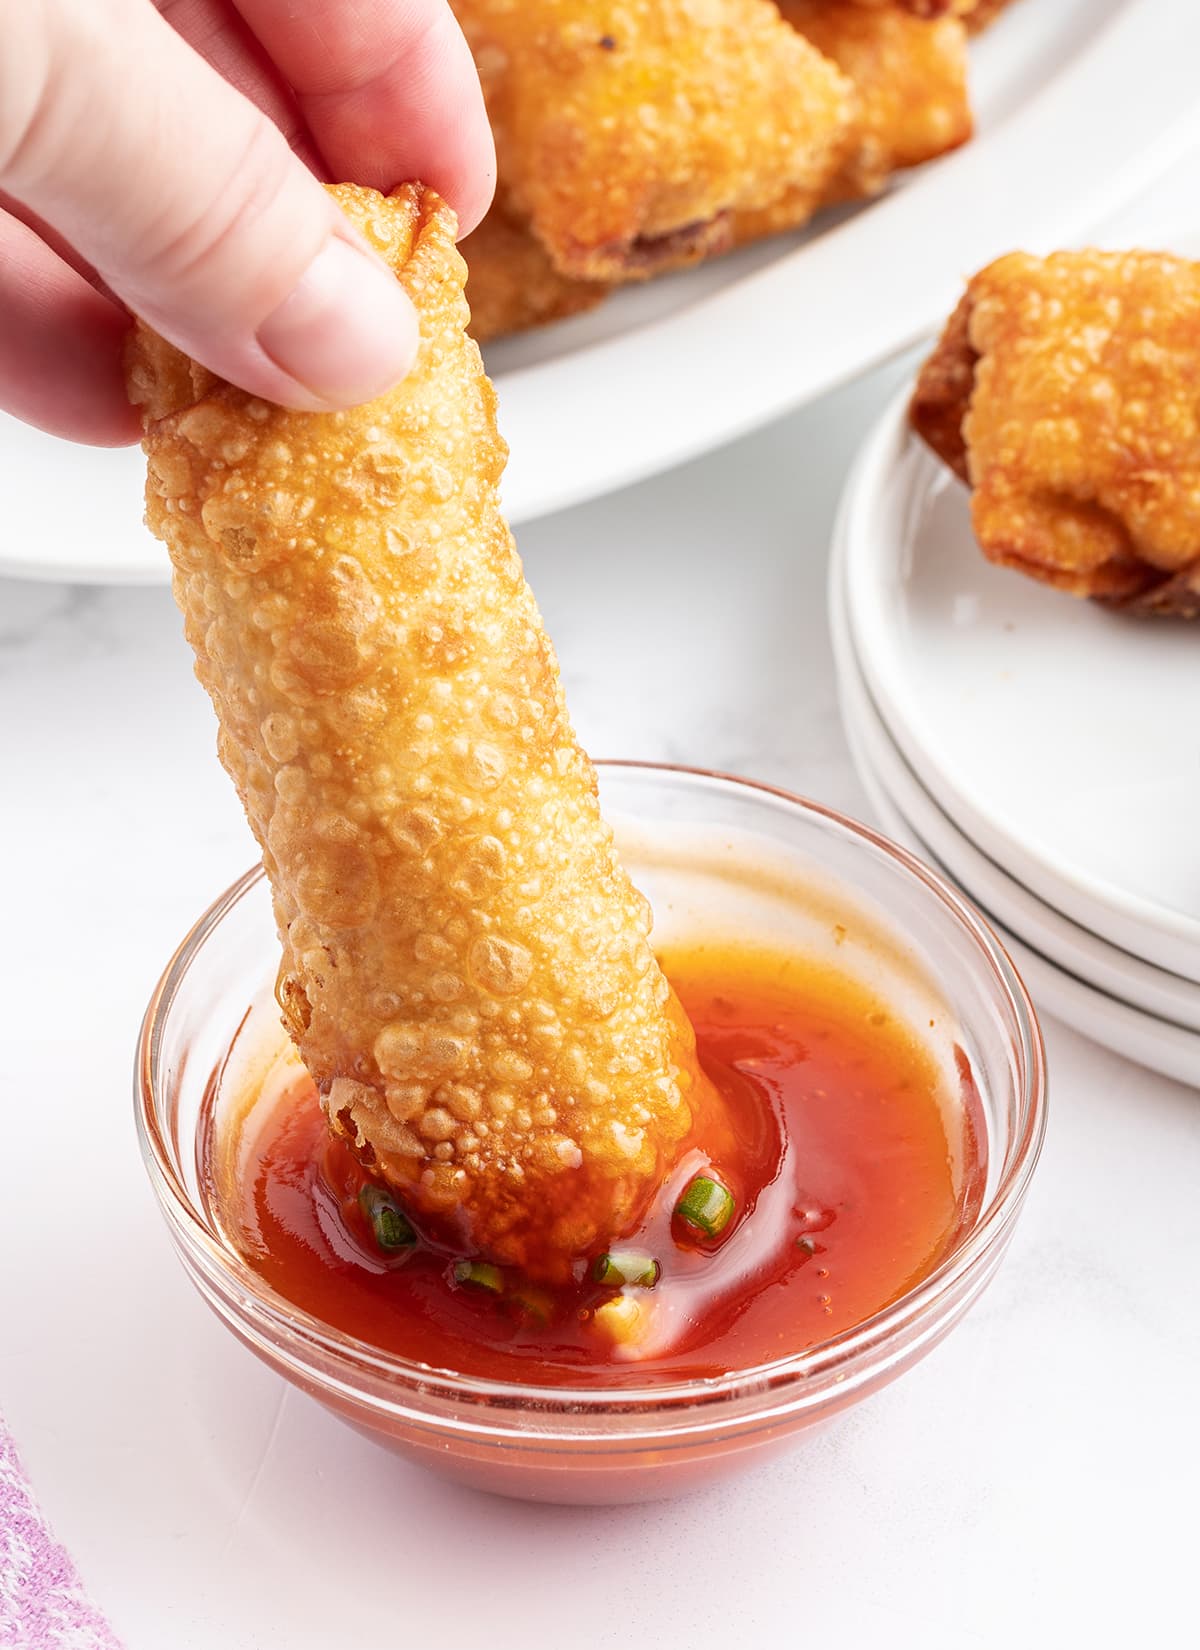 A hand dipping an egg roll into a bowl of sweet and sour sauce.